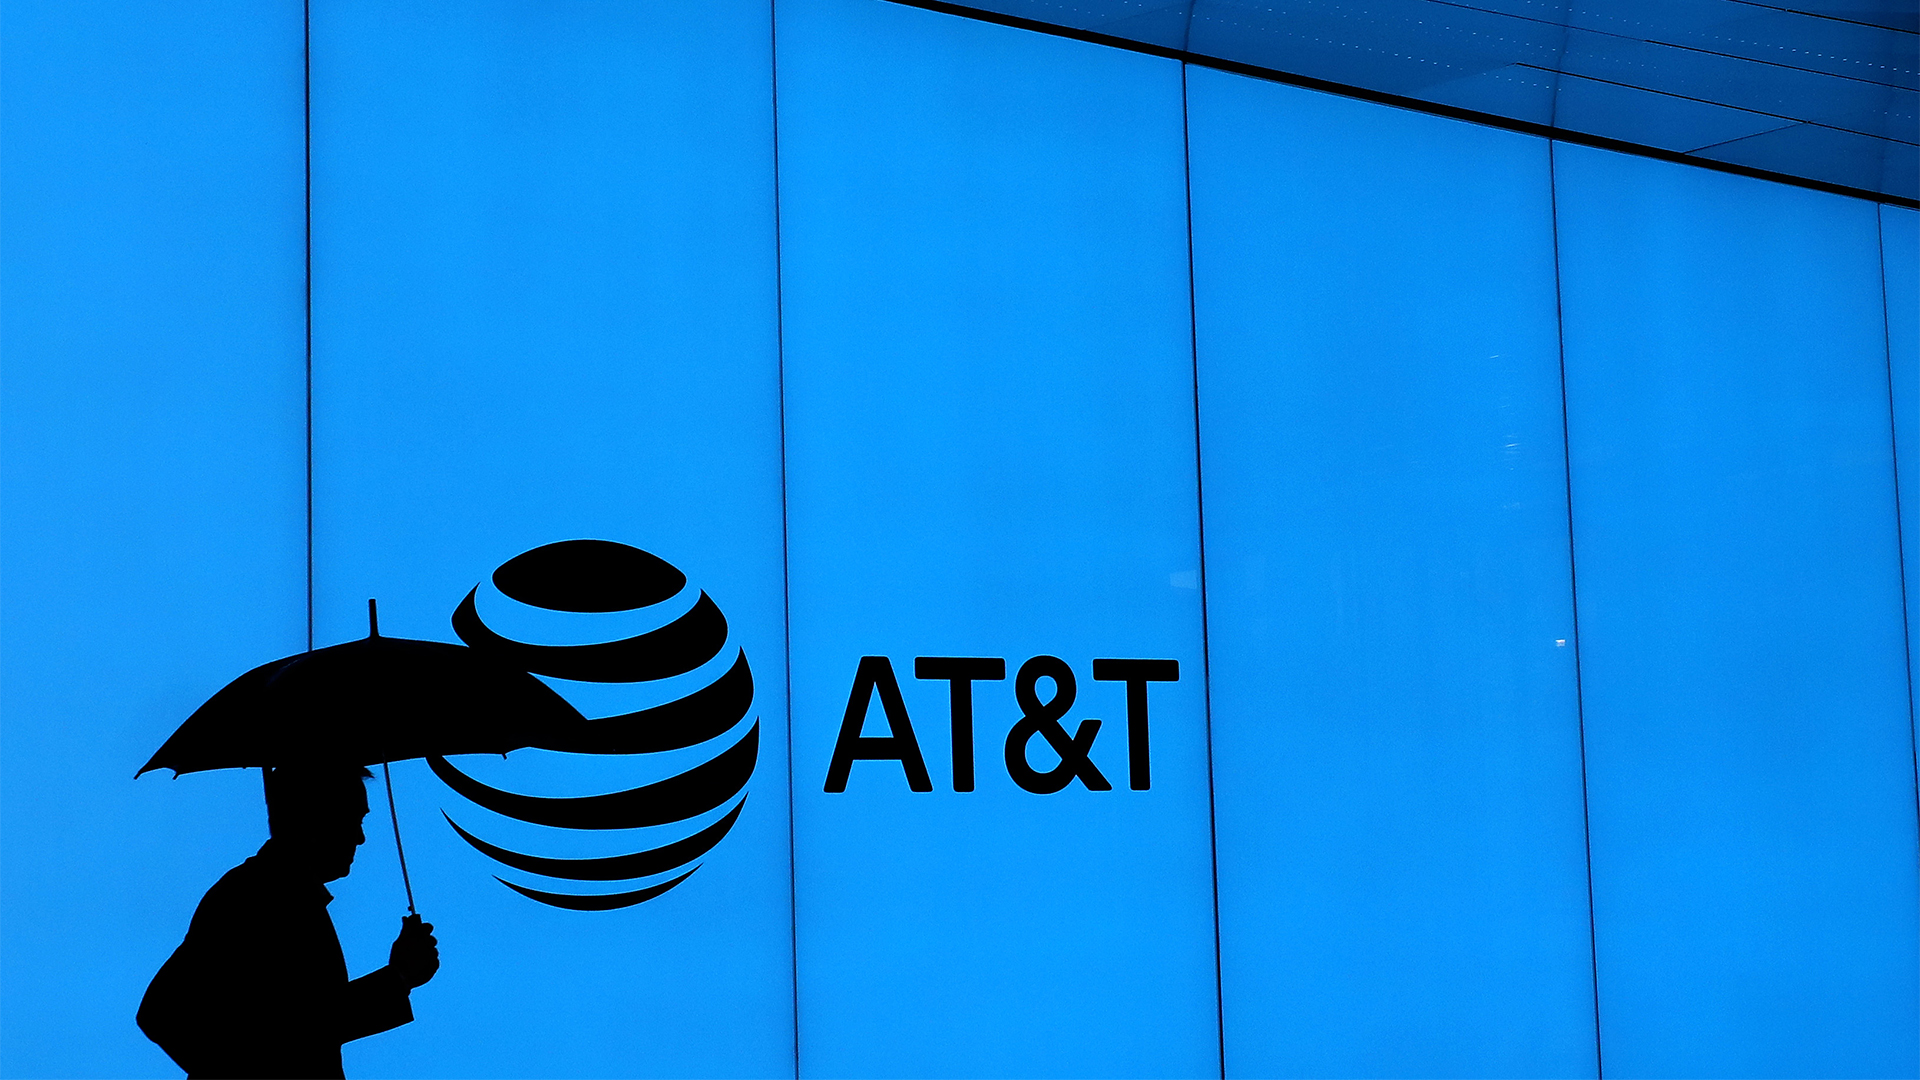 Everything you need to know about the AT&T data breach